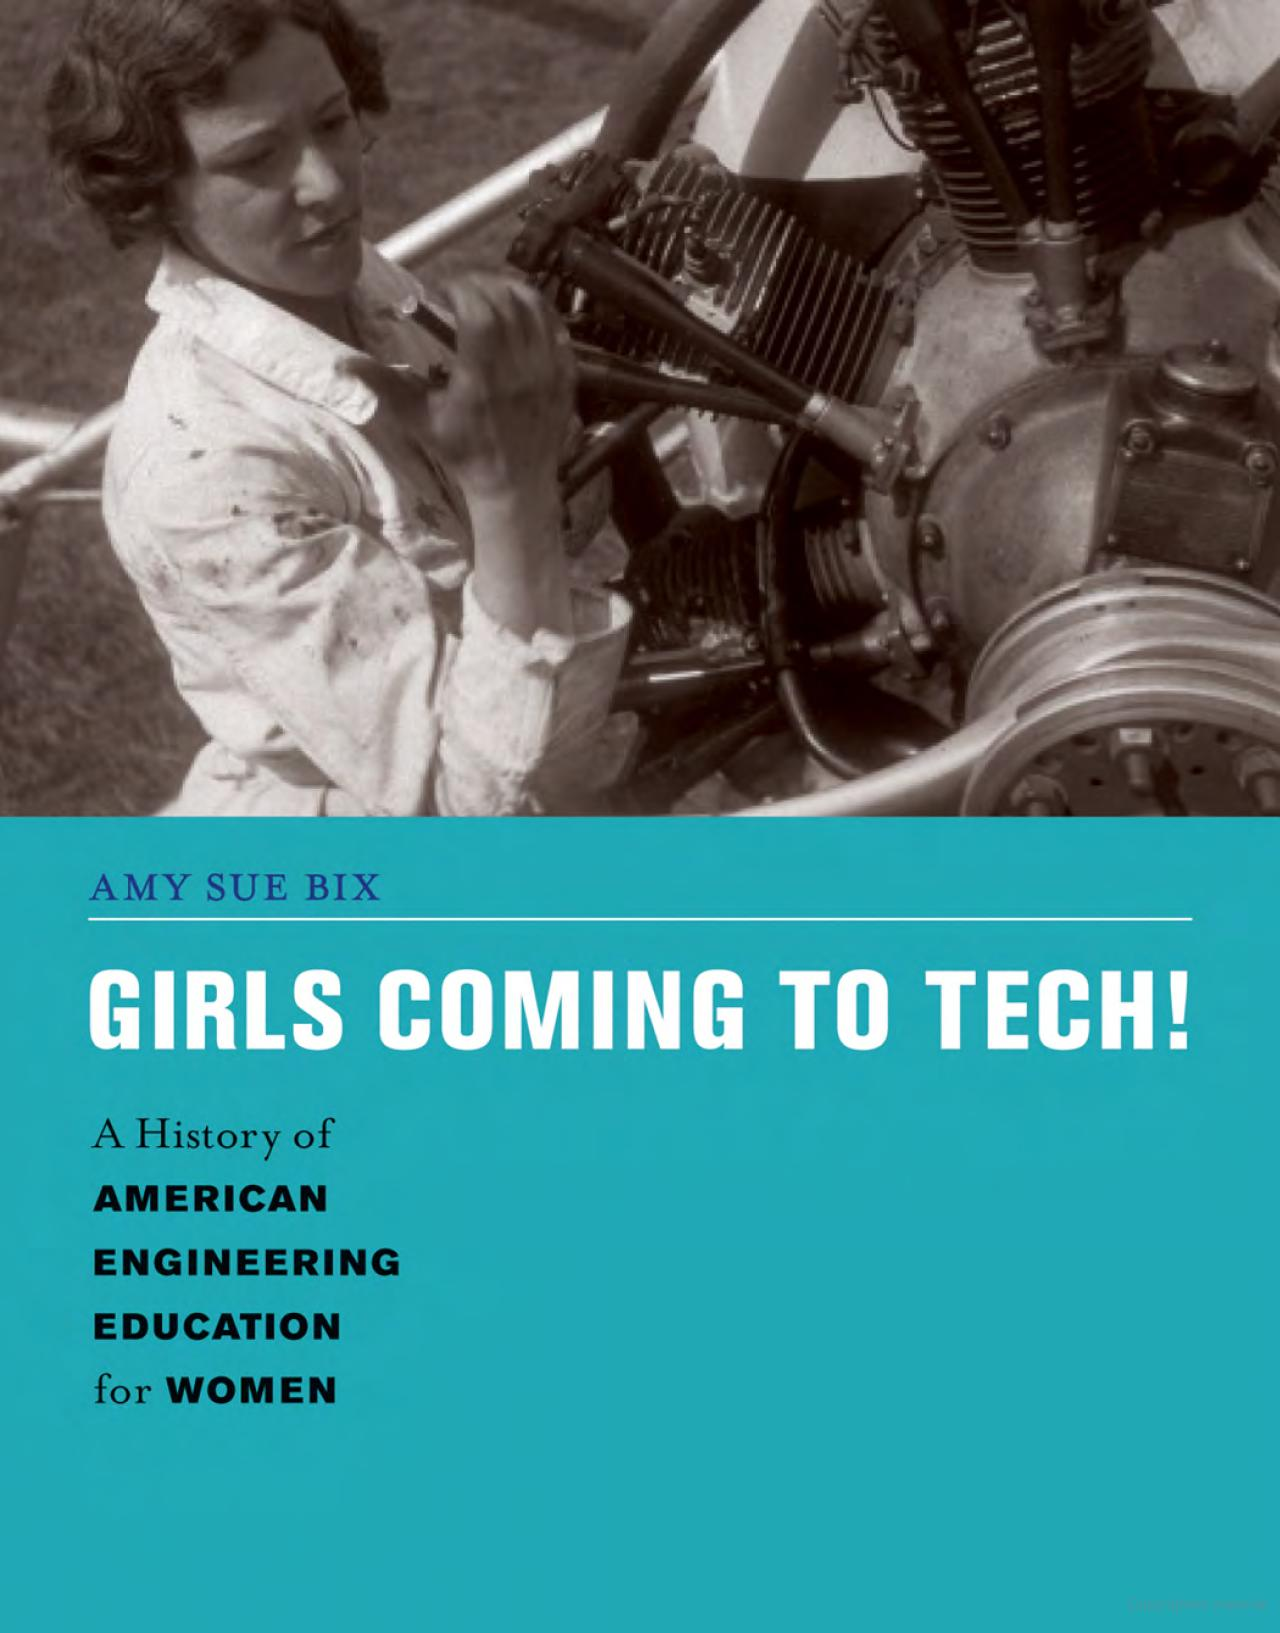 Girls coming to tech! a history of American engineering education for women